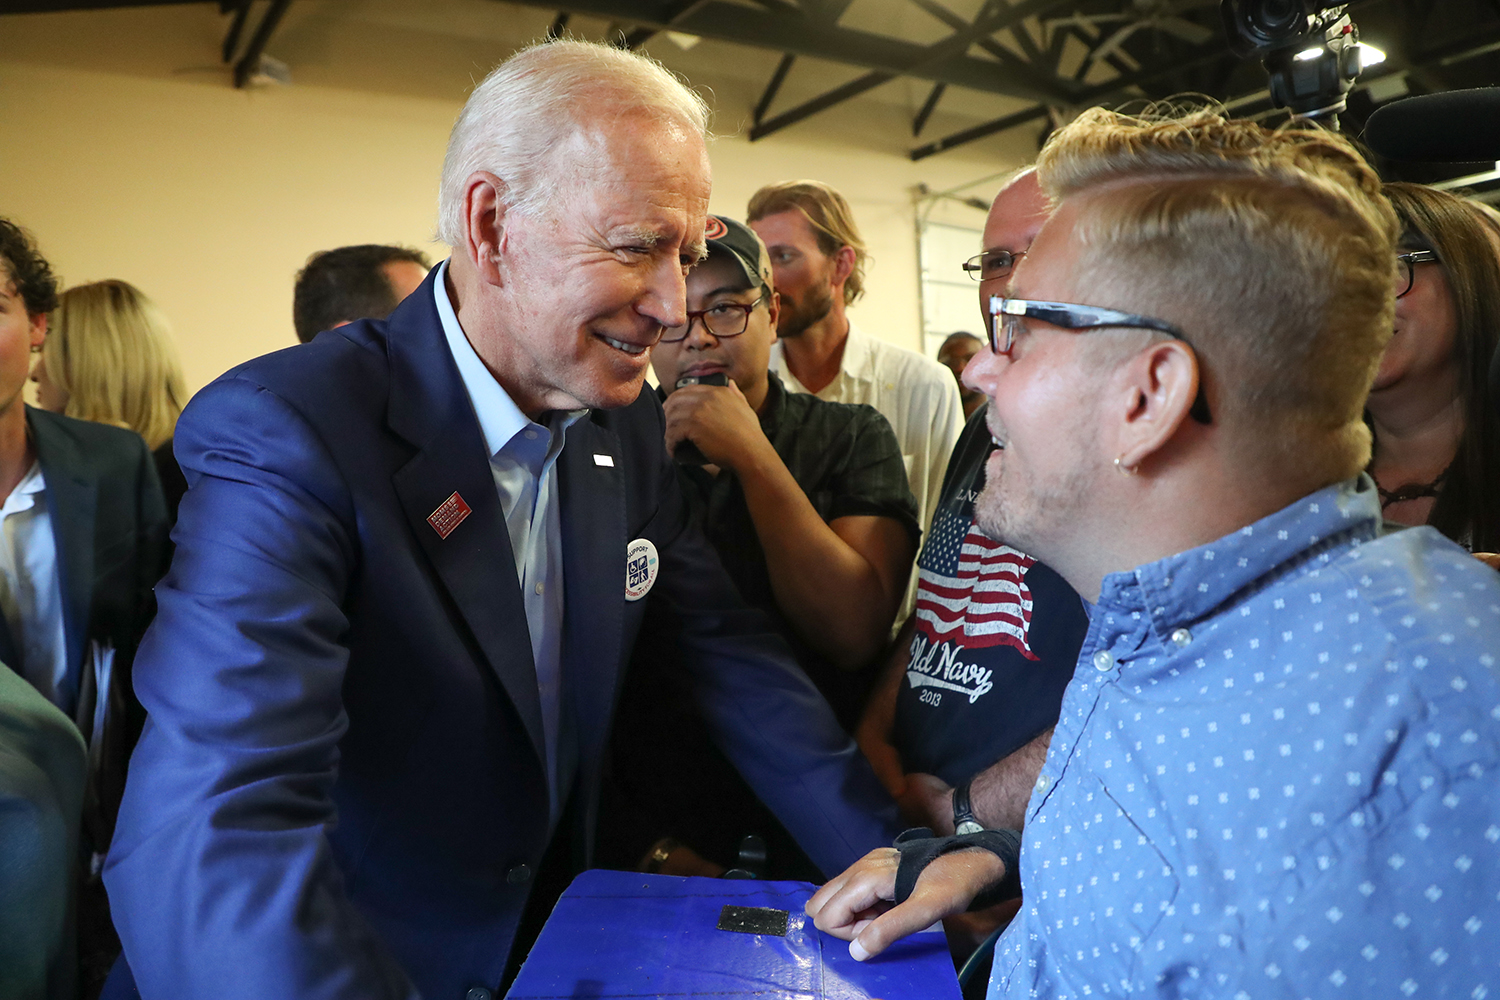  Former Vice President Joe Biden speaks with Tucker Cassidy of Waterloo at the 1st District Democrats Passport to Victory rally at the Linn County Fairgrounds on Saturday, Aug. 10, 2019.  